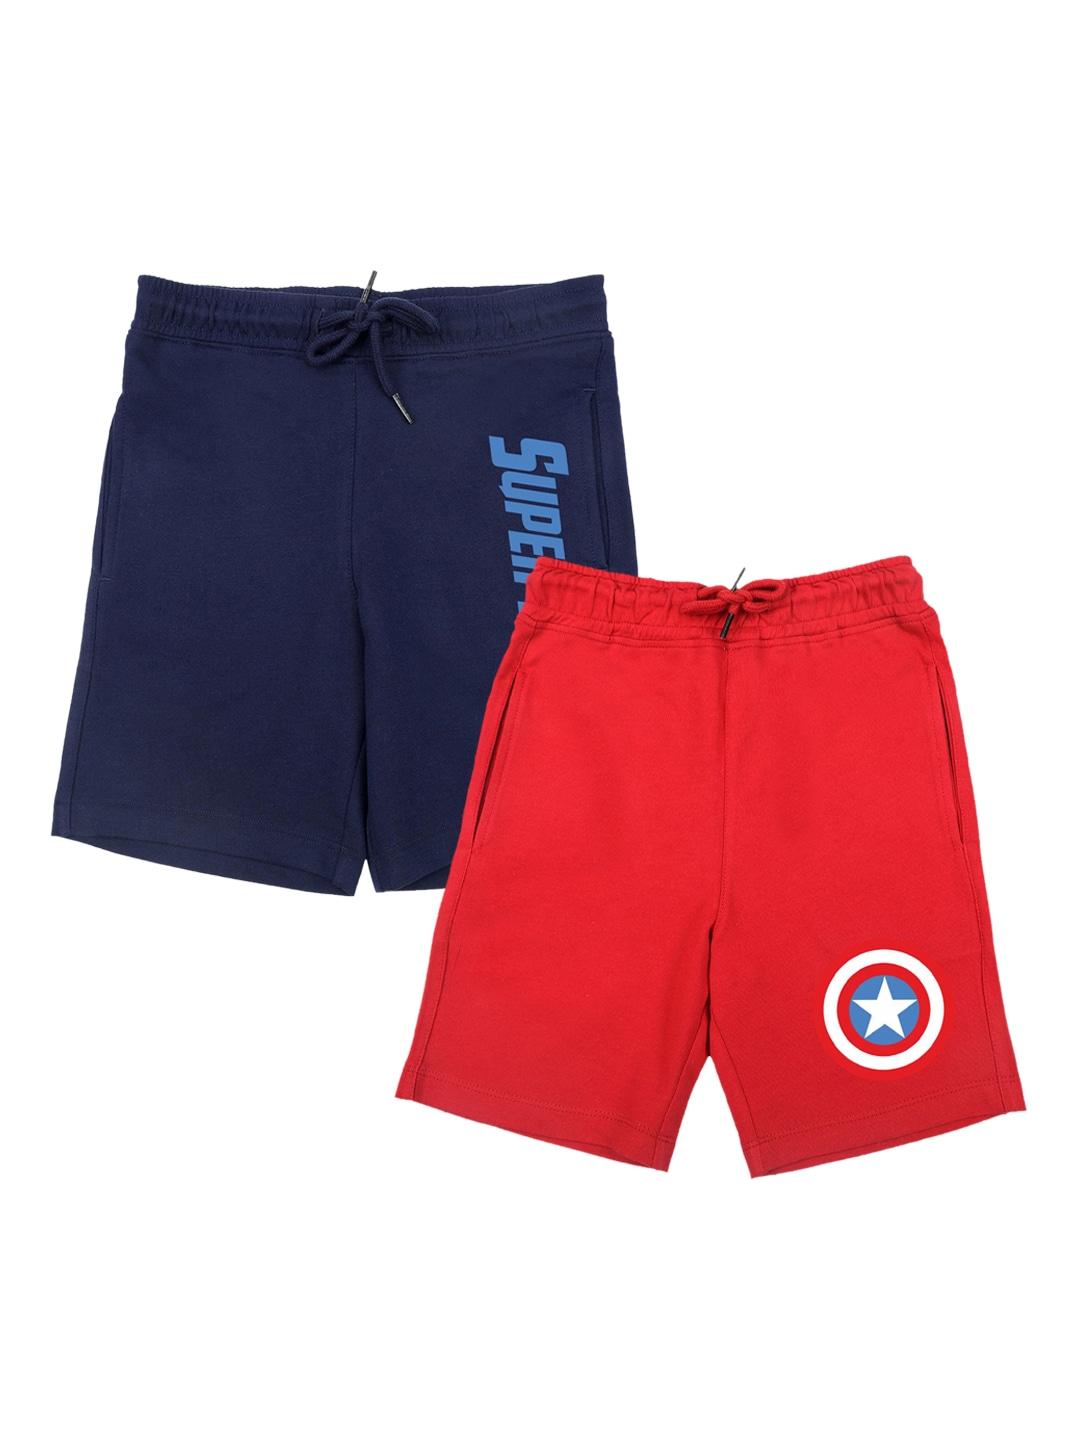 marvel by wear your mind boys pack of 2 captain america shorts